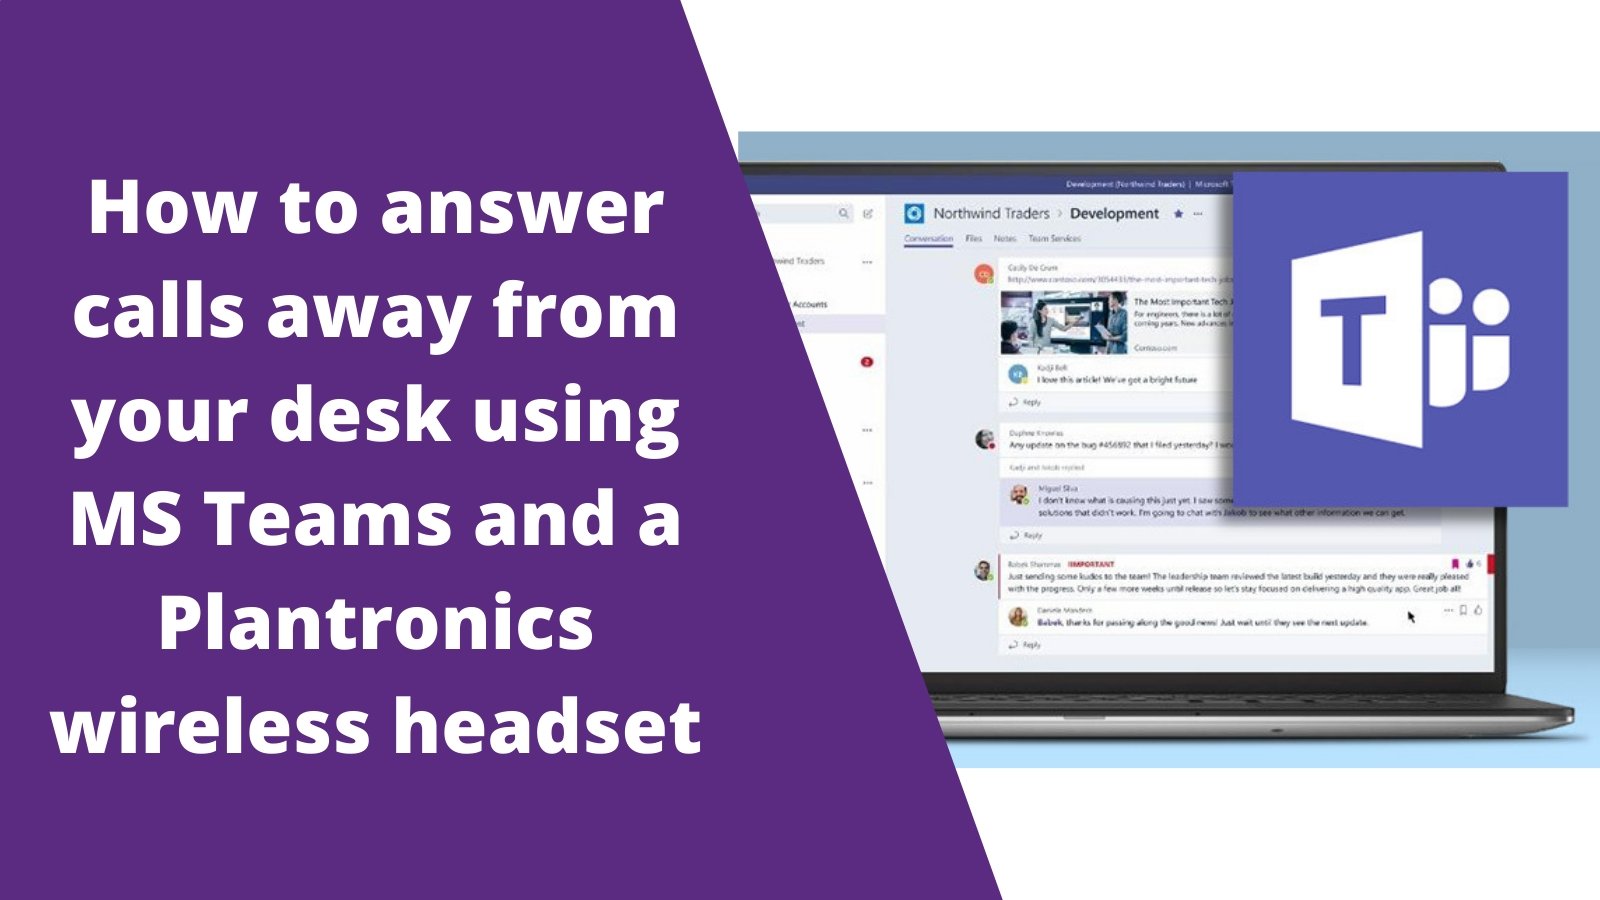 How How To Answer Calls Away From Your Desk using MS Teams and a Plantronics Wireless Headset - Headset Advisor